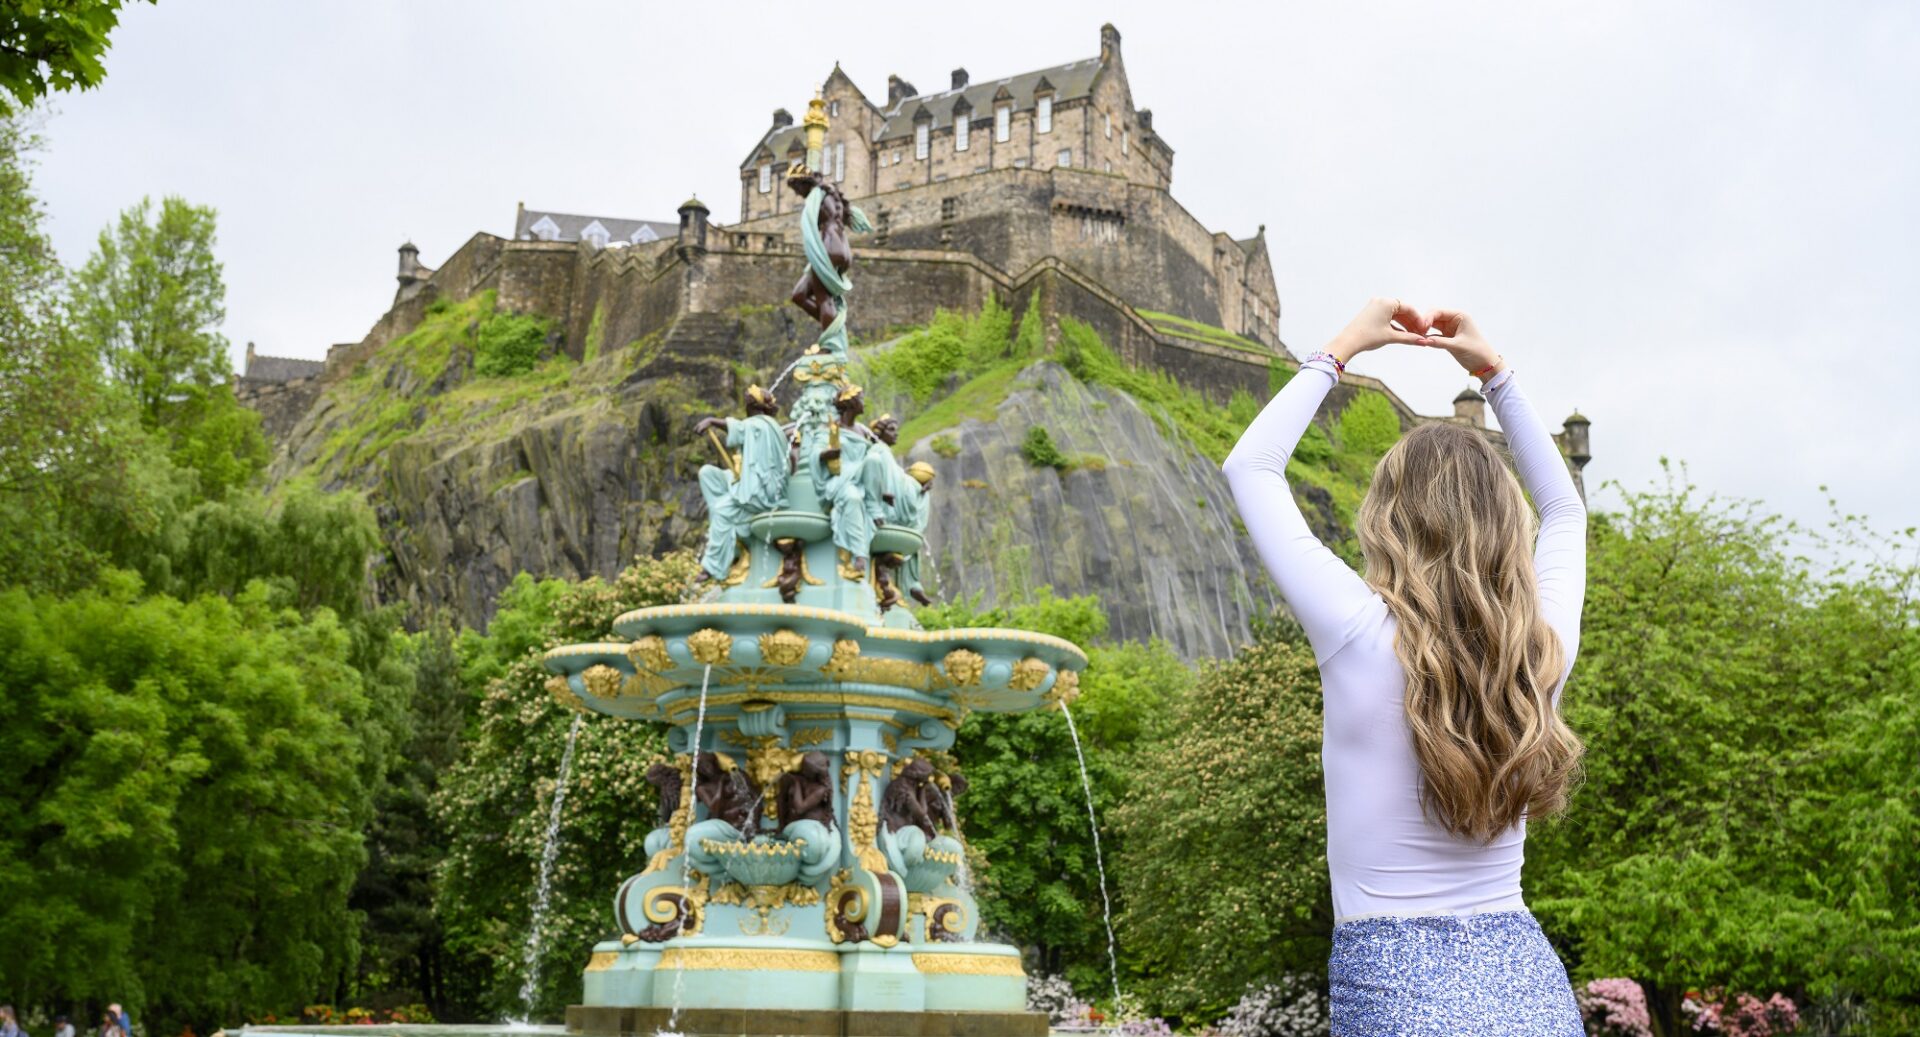 Taylor Swift Fan in front of the Ross Fountain with Edinburgh Castle in the background